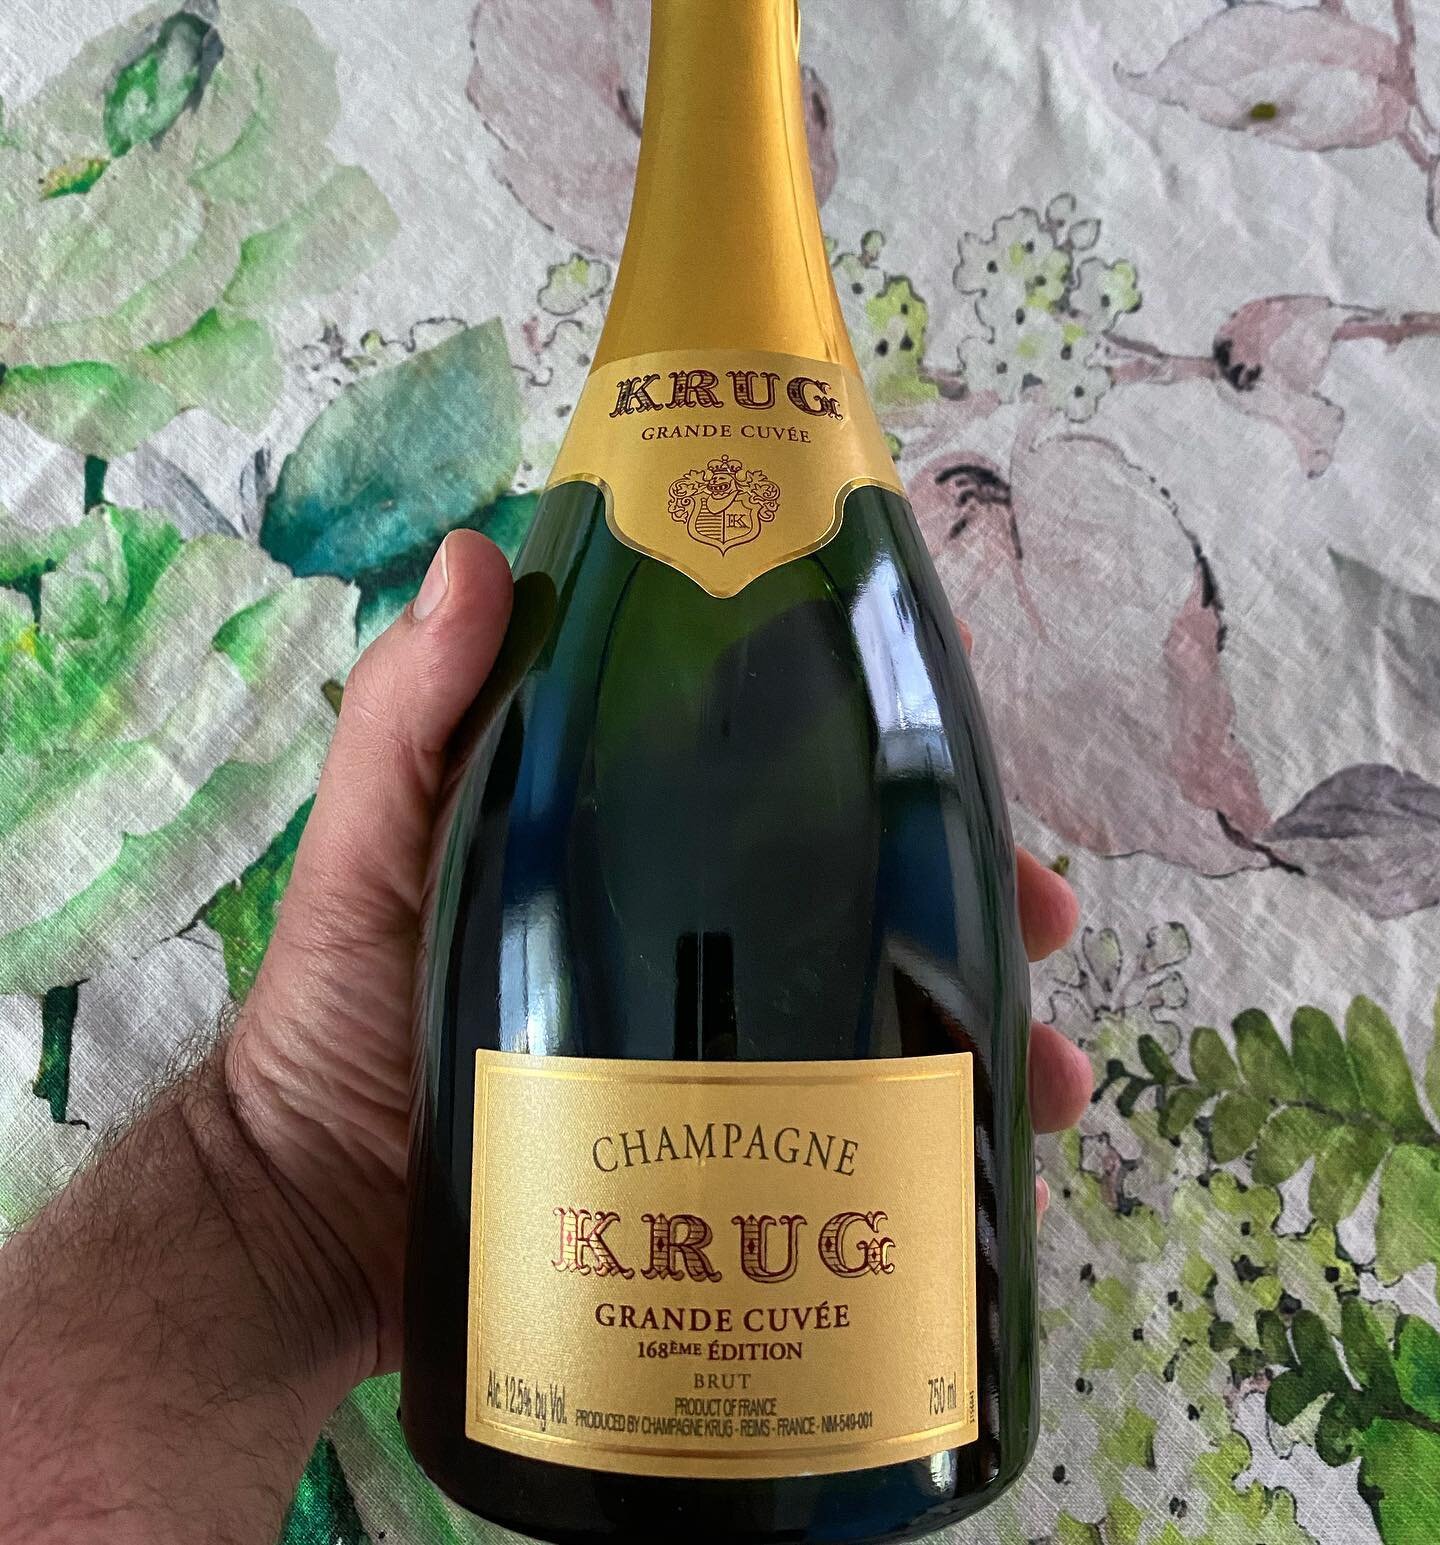 The House of Krug in Reims, famously known as master blenders, used over 120 wines from 10 different vintages to make this beautiful 168&egrave;me &Eacute;dition of the landmark Grande Cuv&eacute;e. The base wine is 2012 vintage, with the final blend